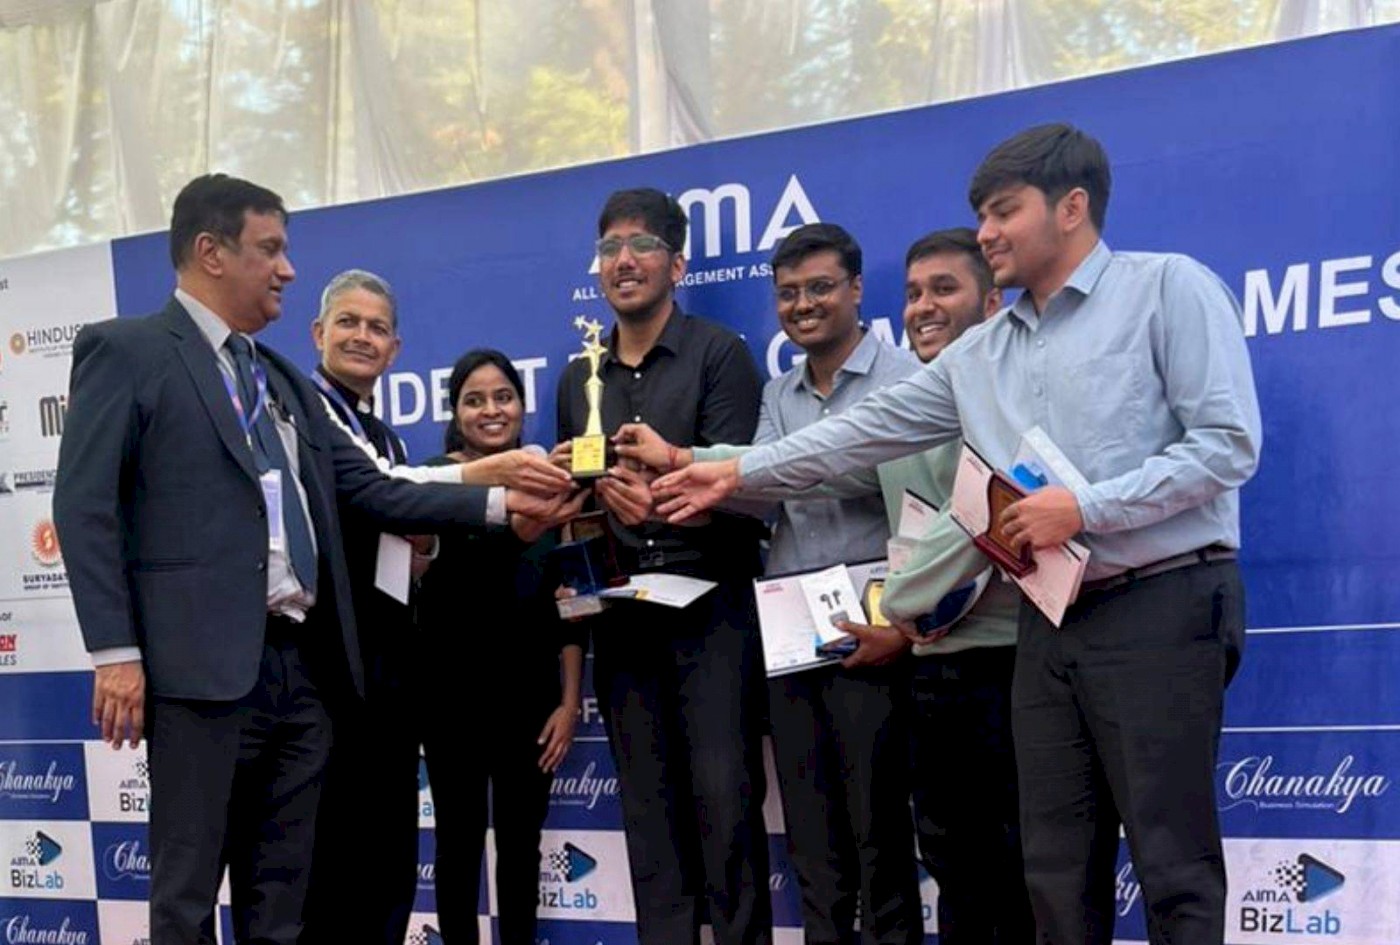 Team Reaches 27th Student Management Games National Round